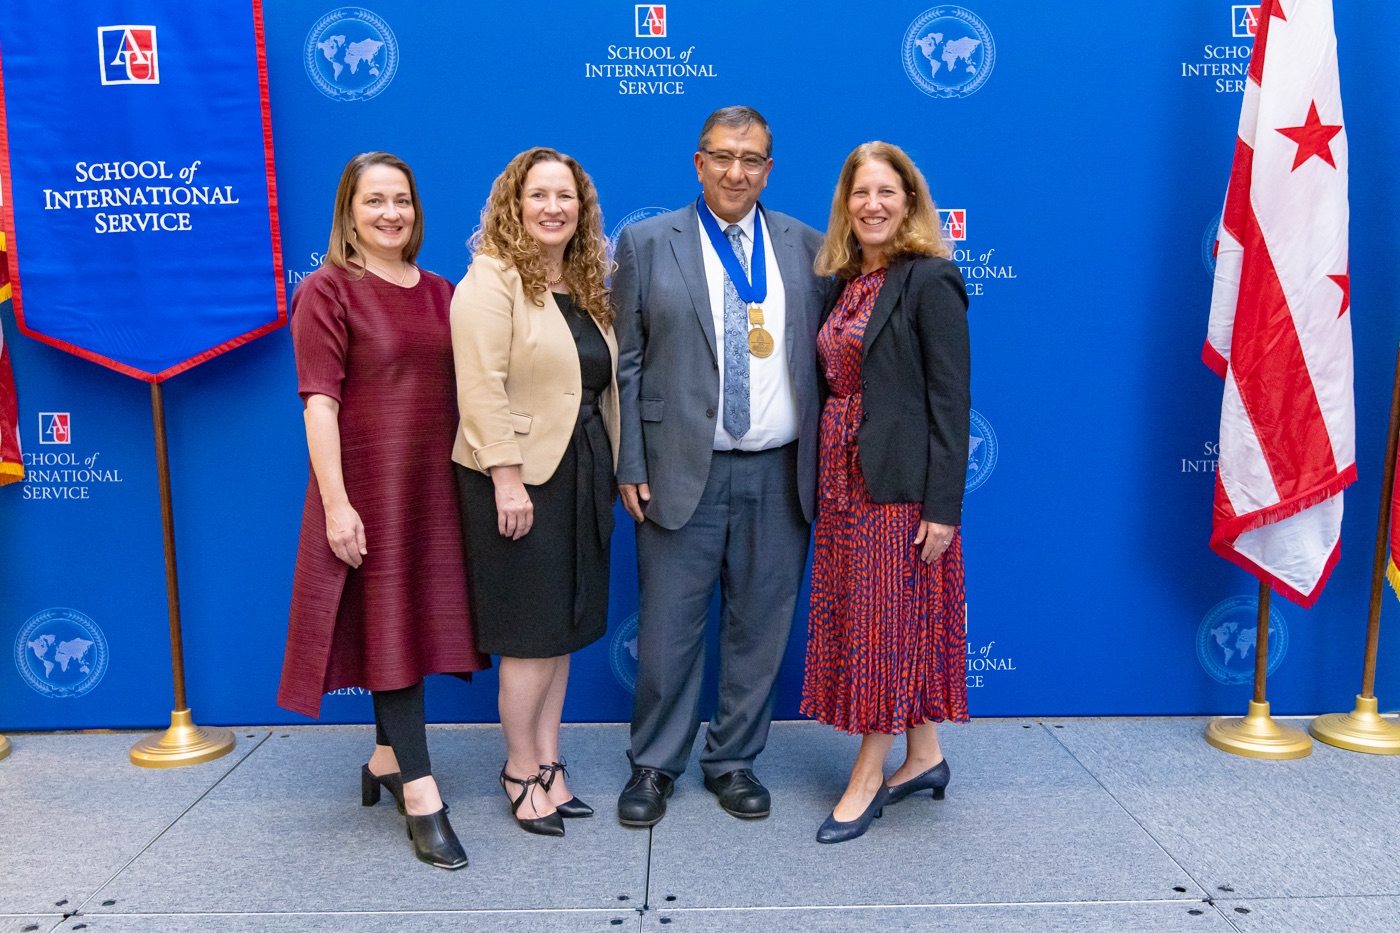 (From left to right) SIS Dean Shannon Hader, Acting Provost and Chief Academic Officer Vicky Wilkins, Professor Mohammed Abu-Nimer, AU President Sylvia M. Burwell